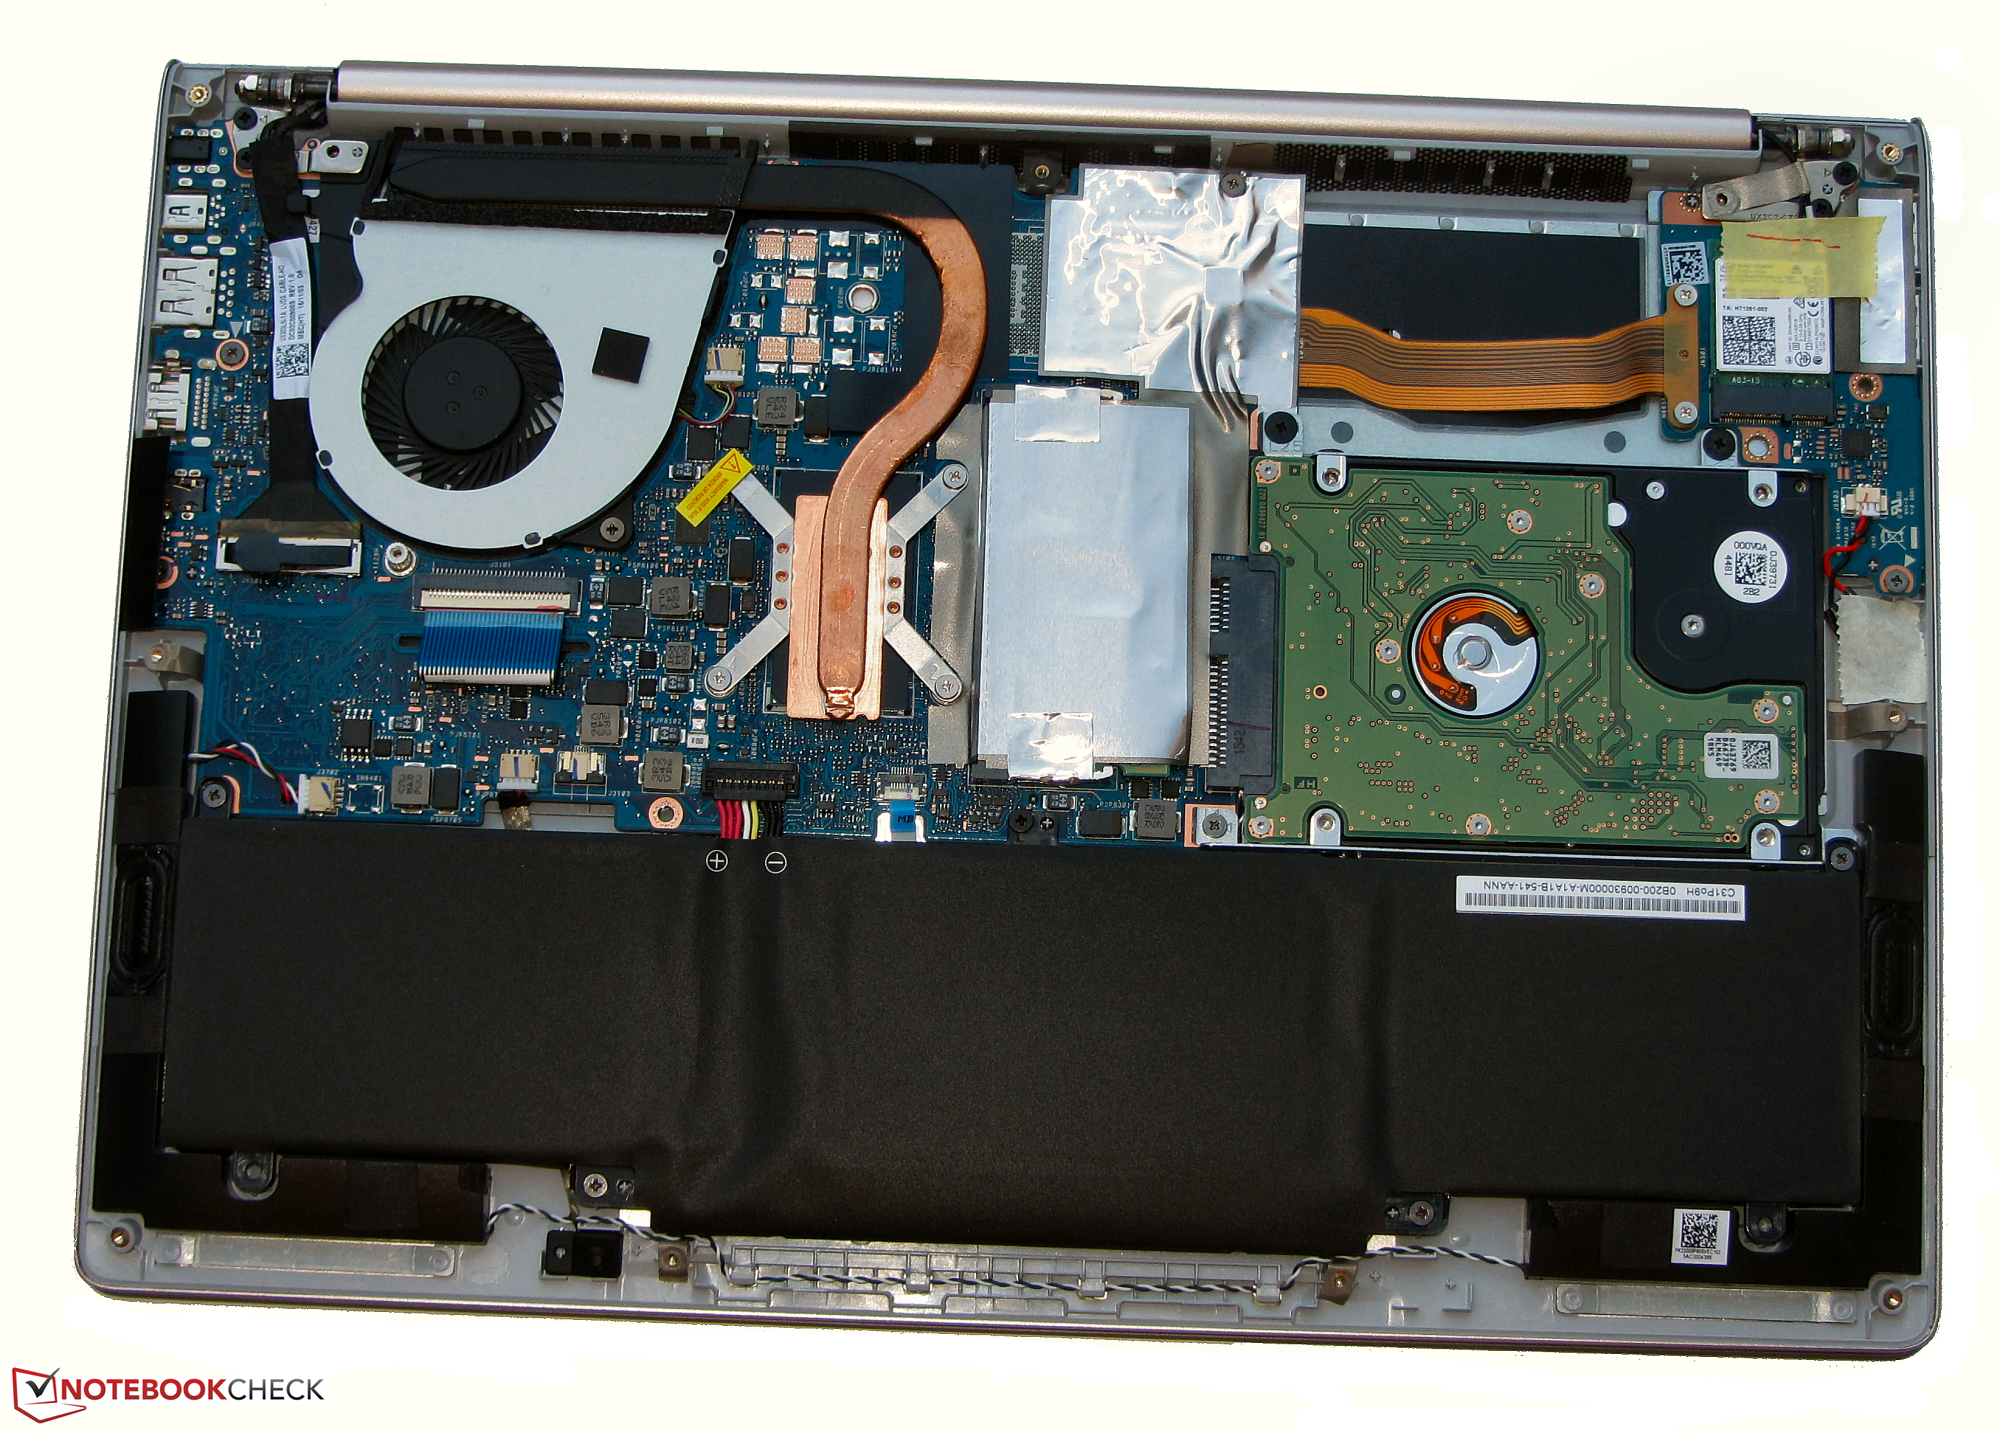 en million sej Bloom What ssd do I use to upgrade storage in my asus Zenbook? - Laptops and  Pre-Built Systems - Linus Tech Tips